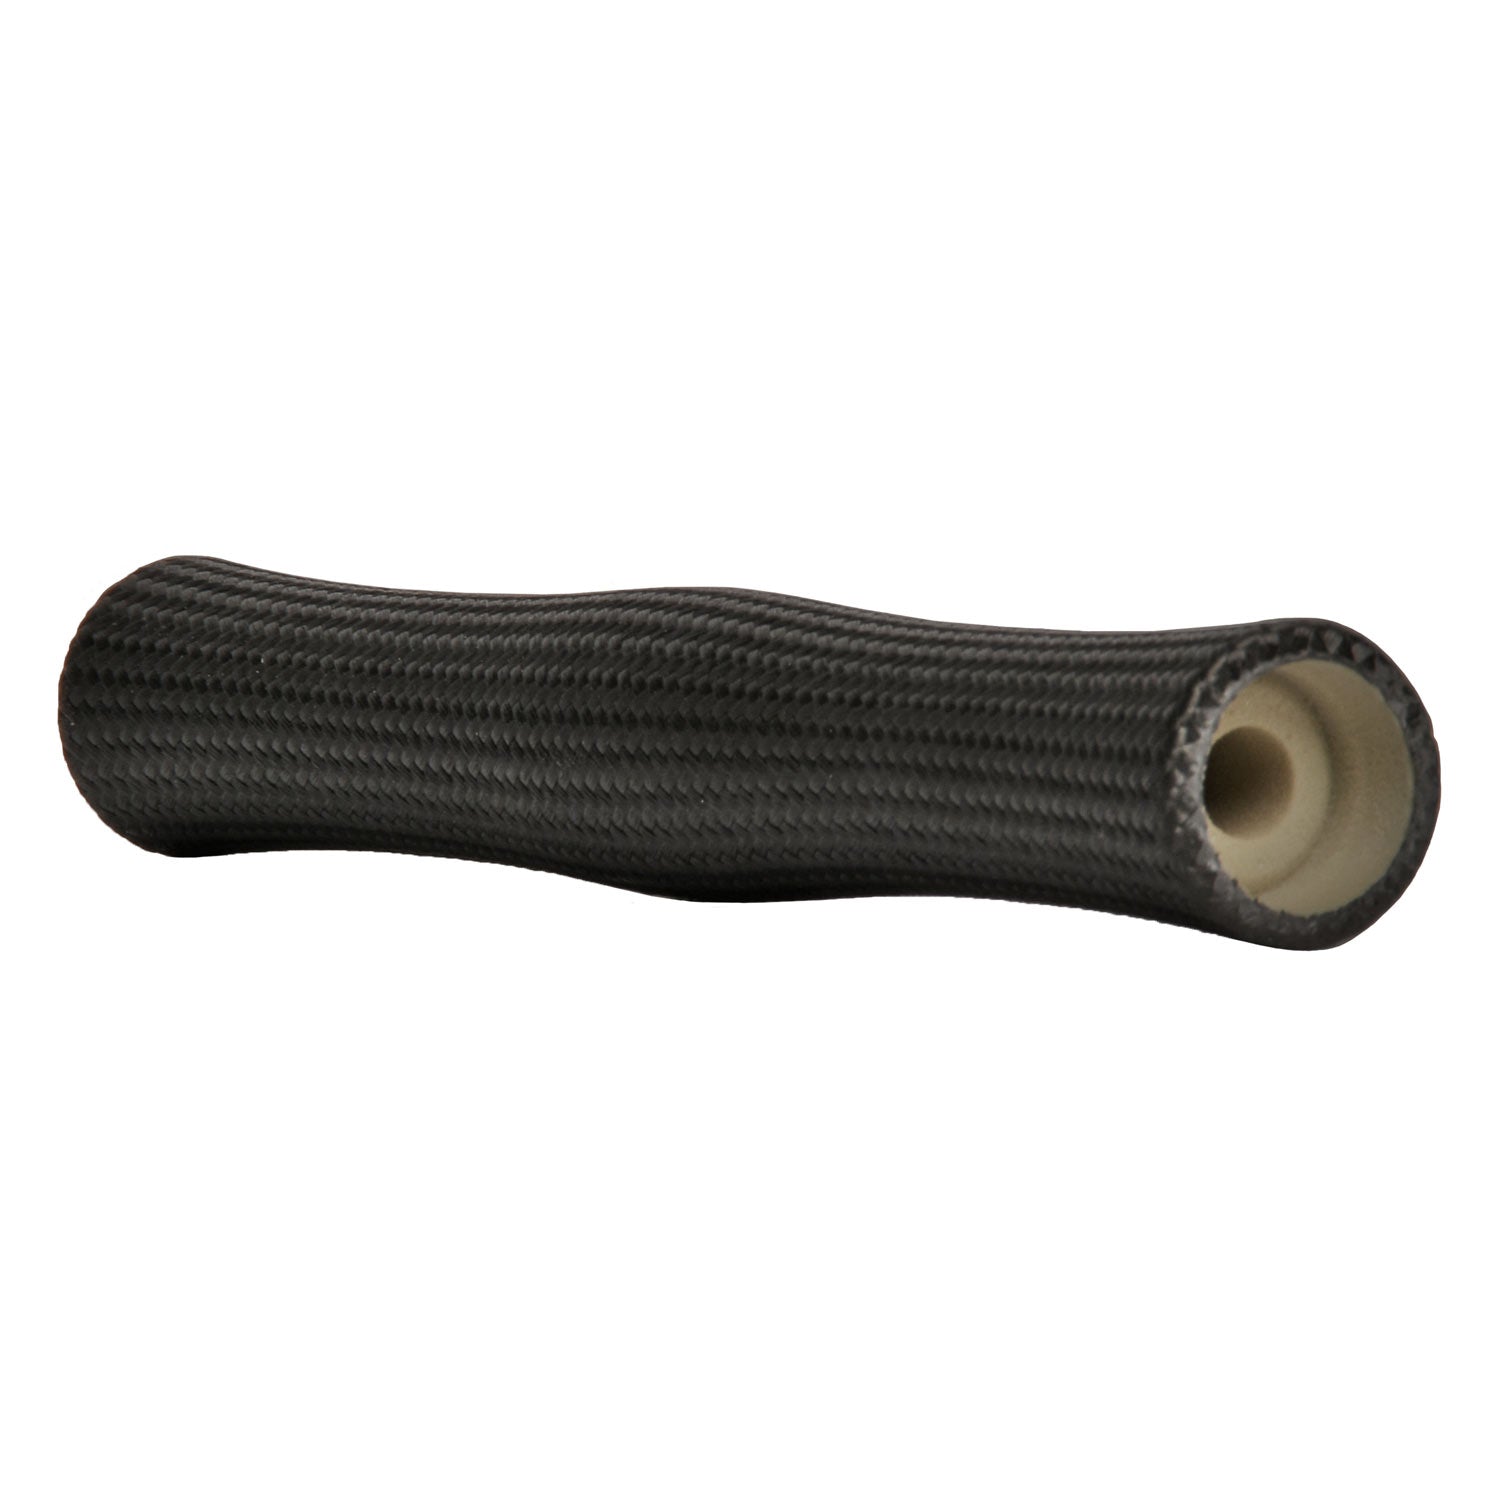 CFX FULL WELLS FLY - Fly grips - fly fishing